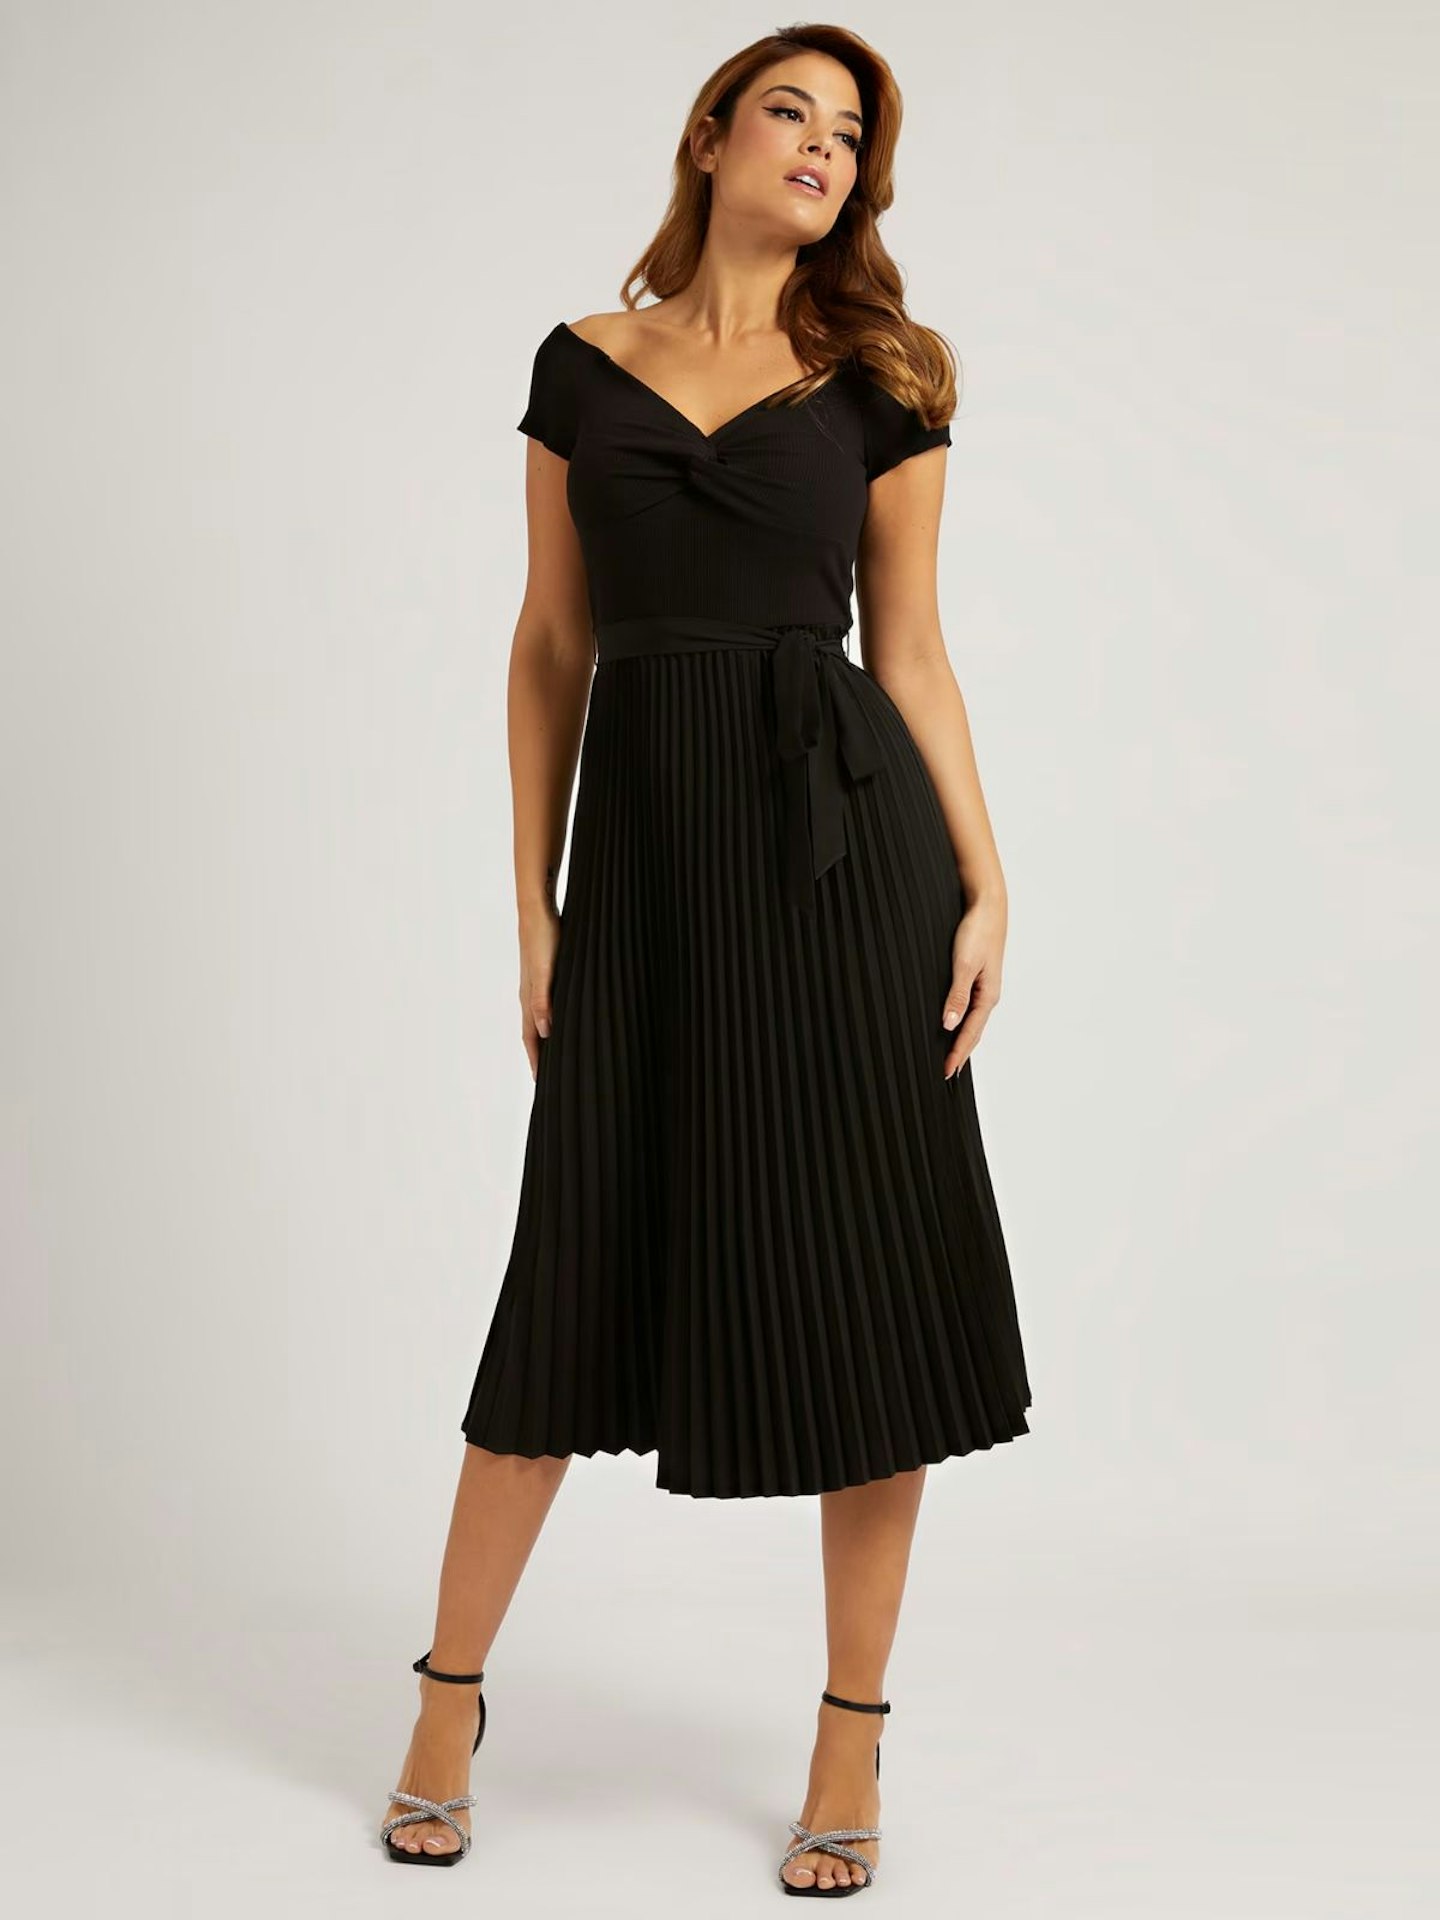 Guess Pleated Sweater Dress